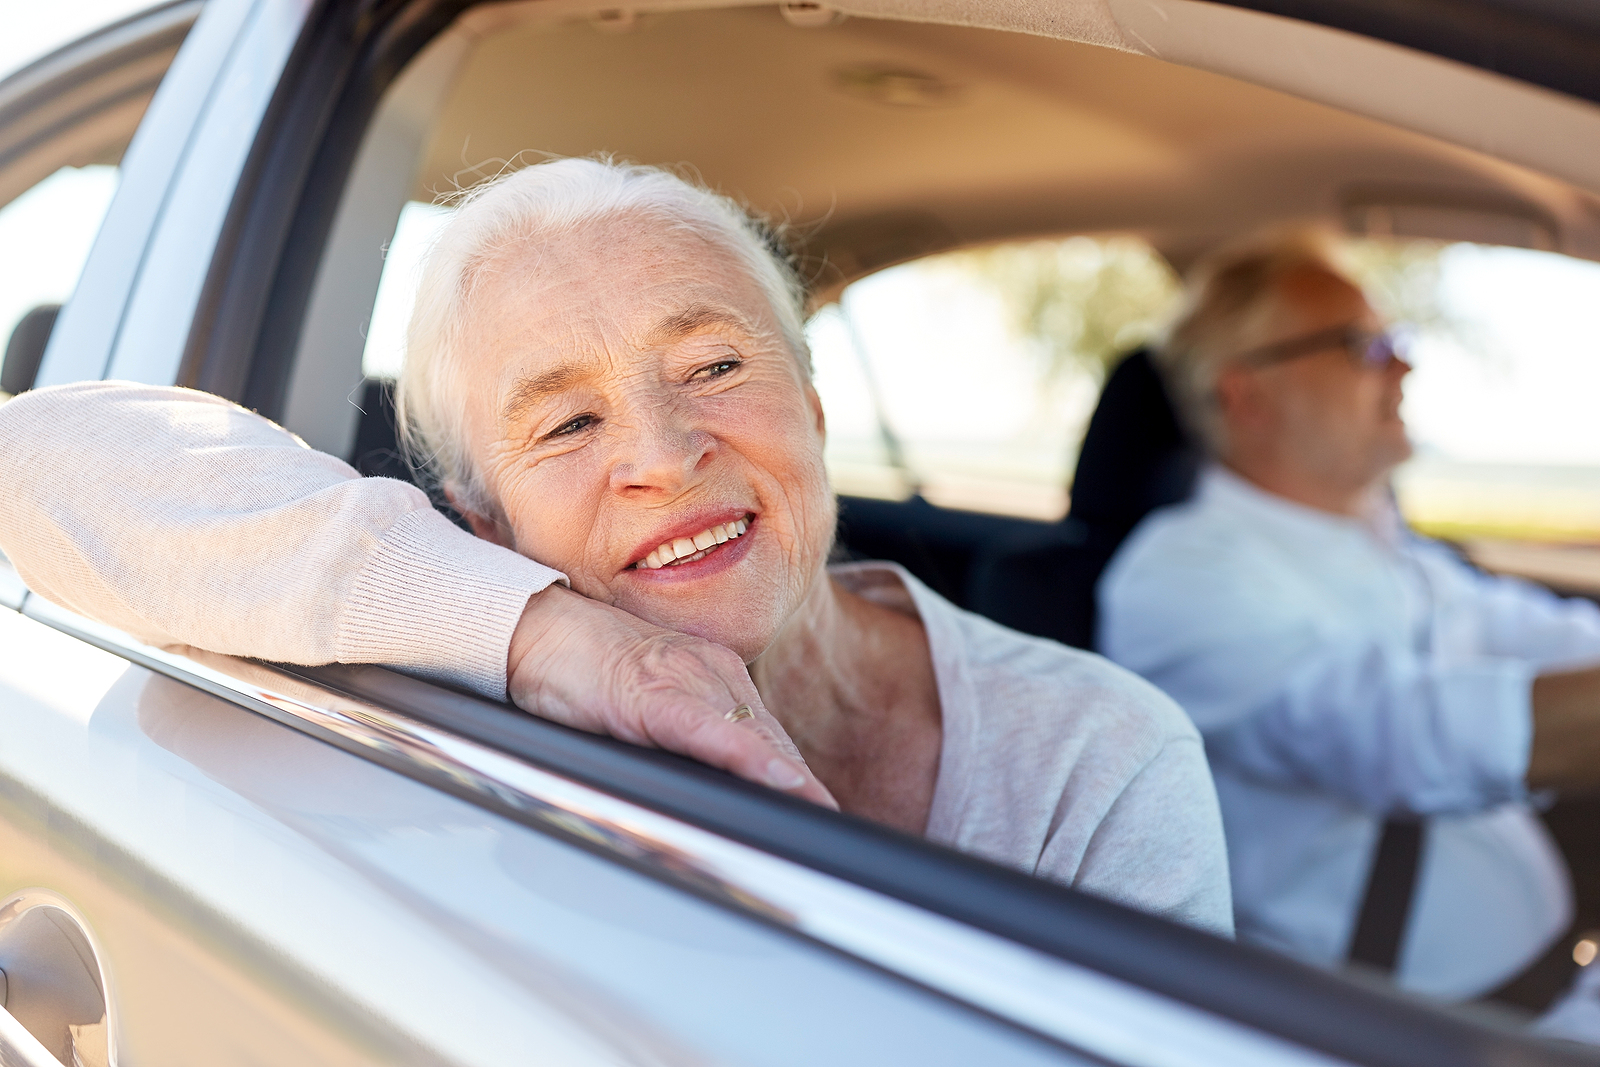 The Top 5 Best Vehicles For Retirement